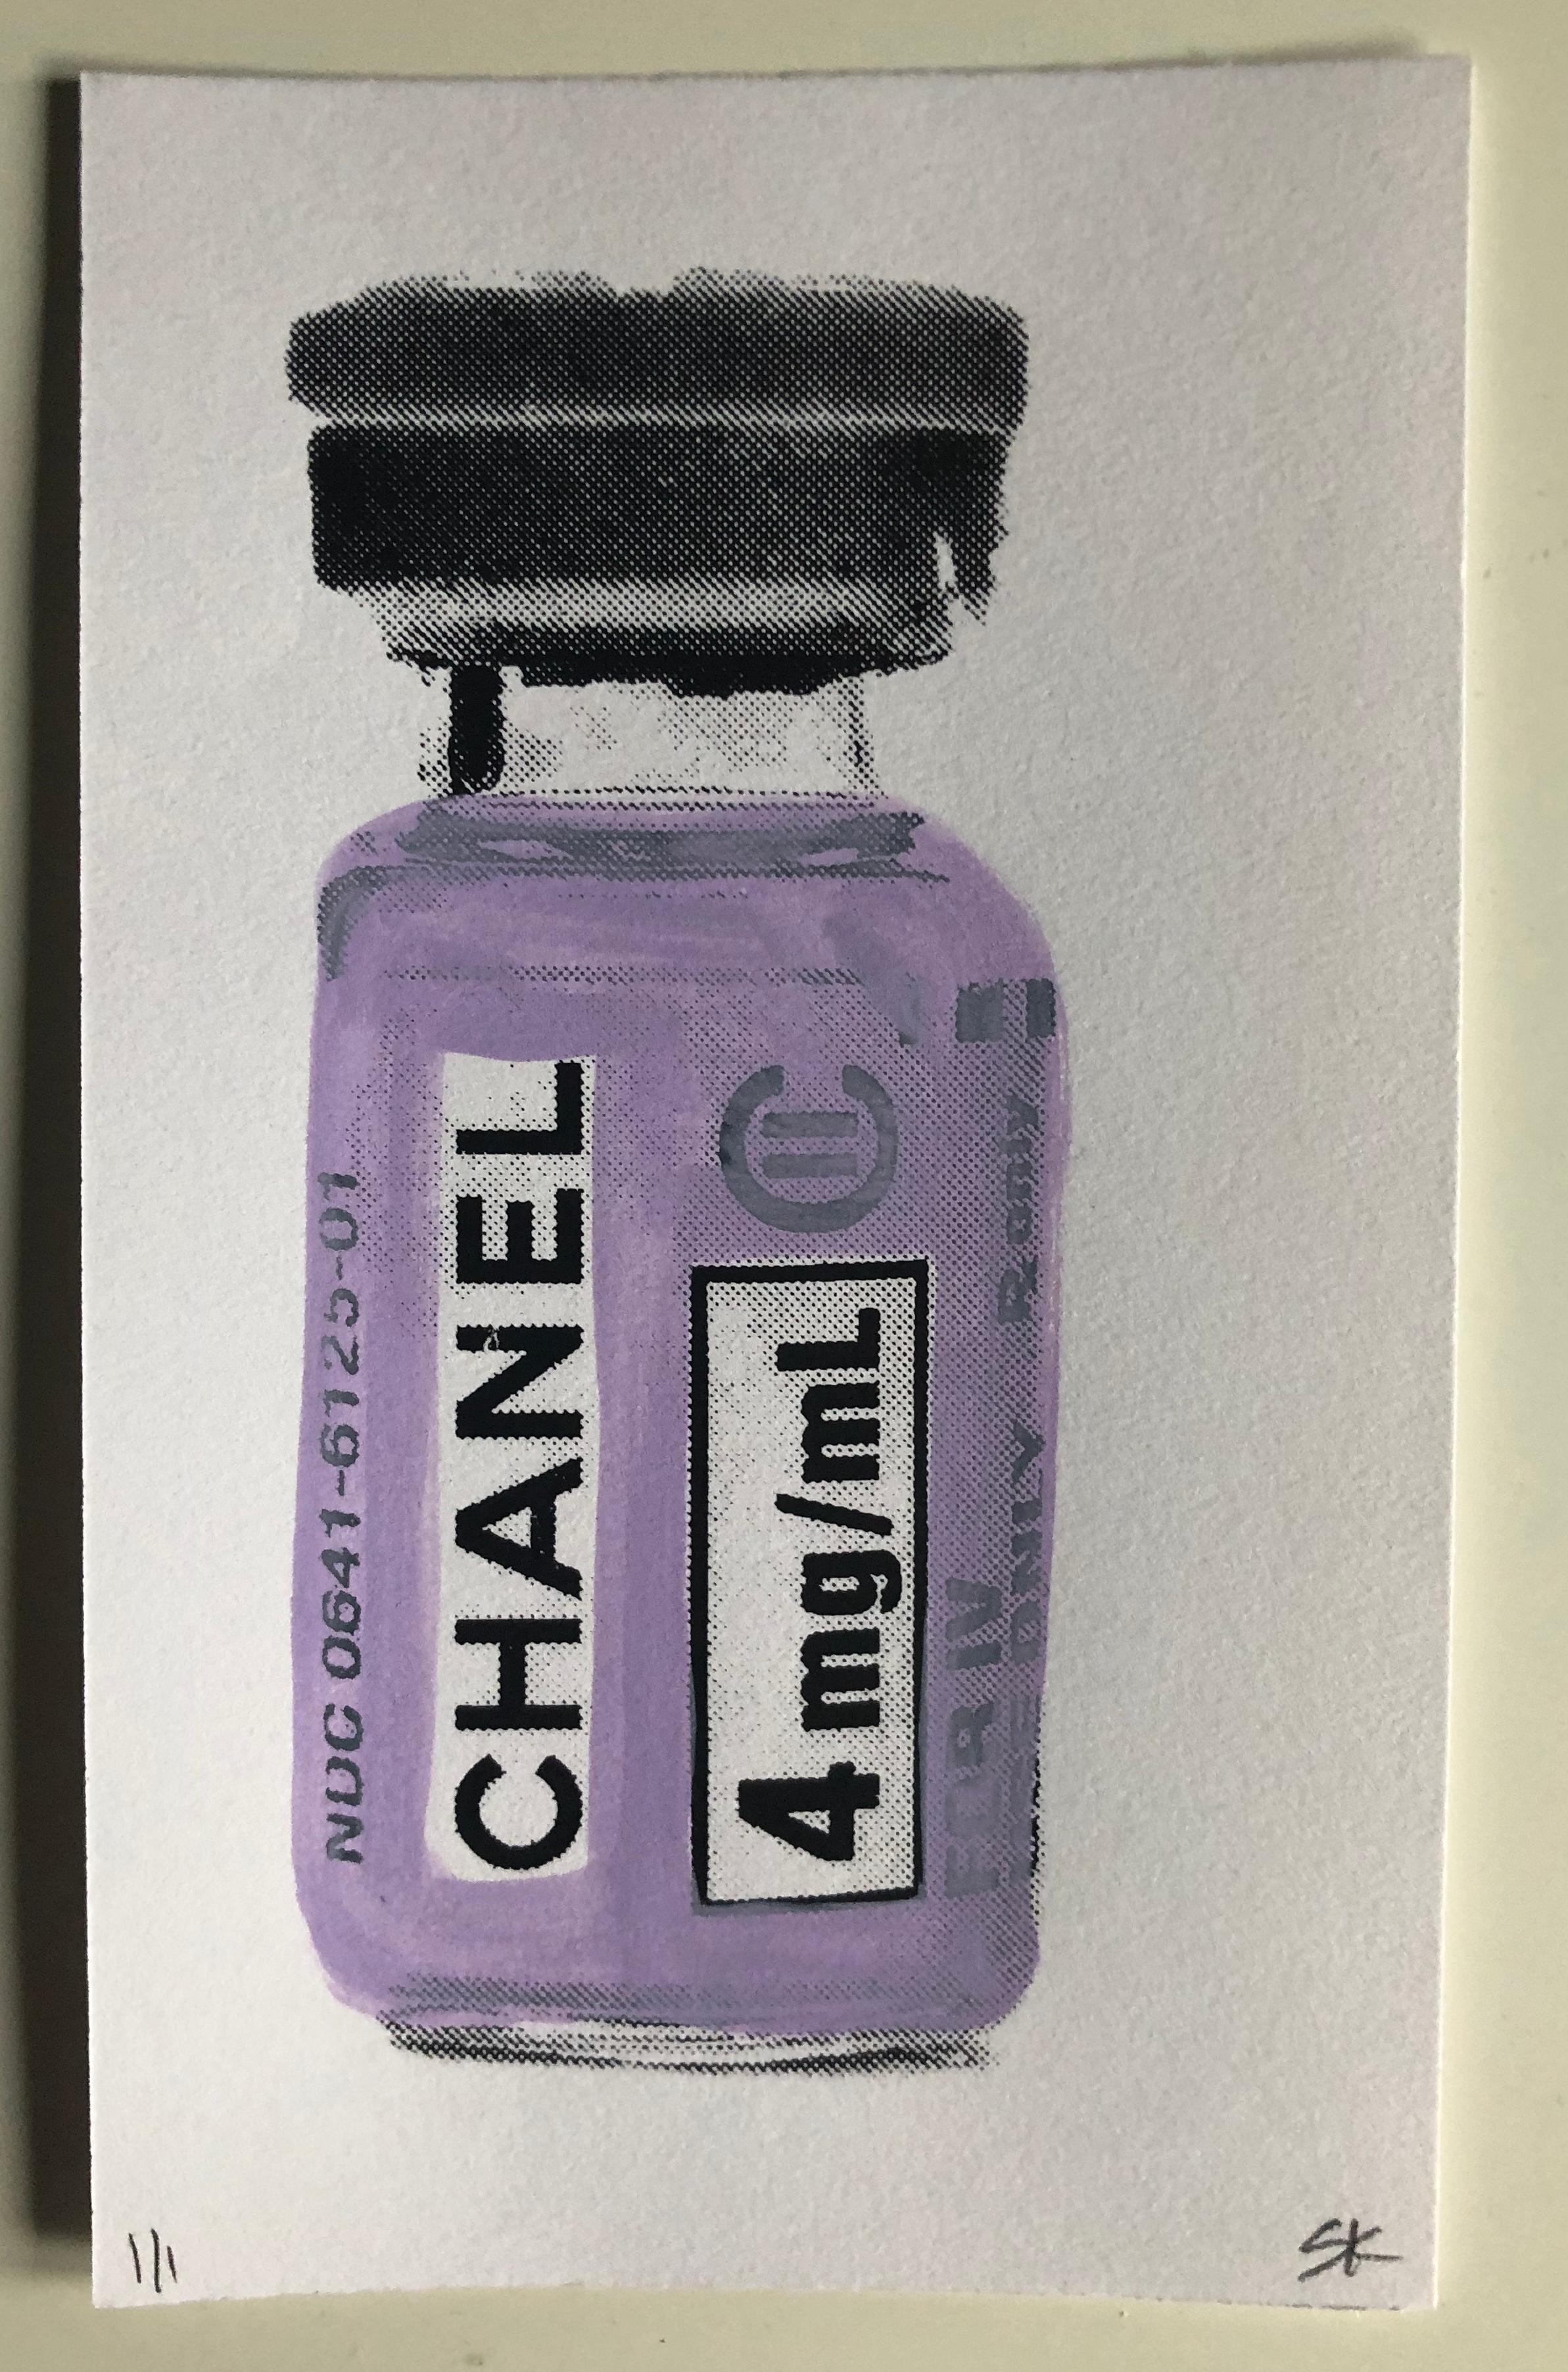 Retail Therapy - CHANEL - Mixed Media Art by Shawn Kolodny